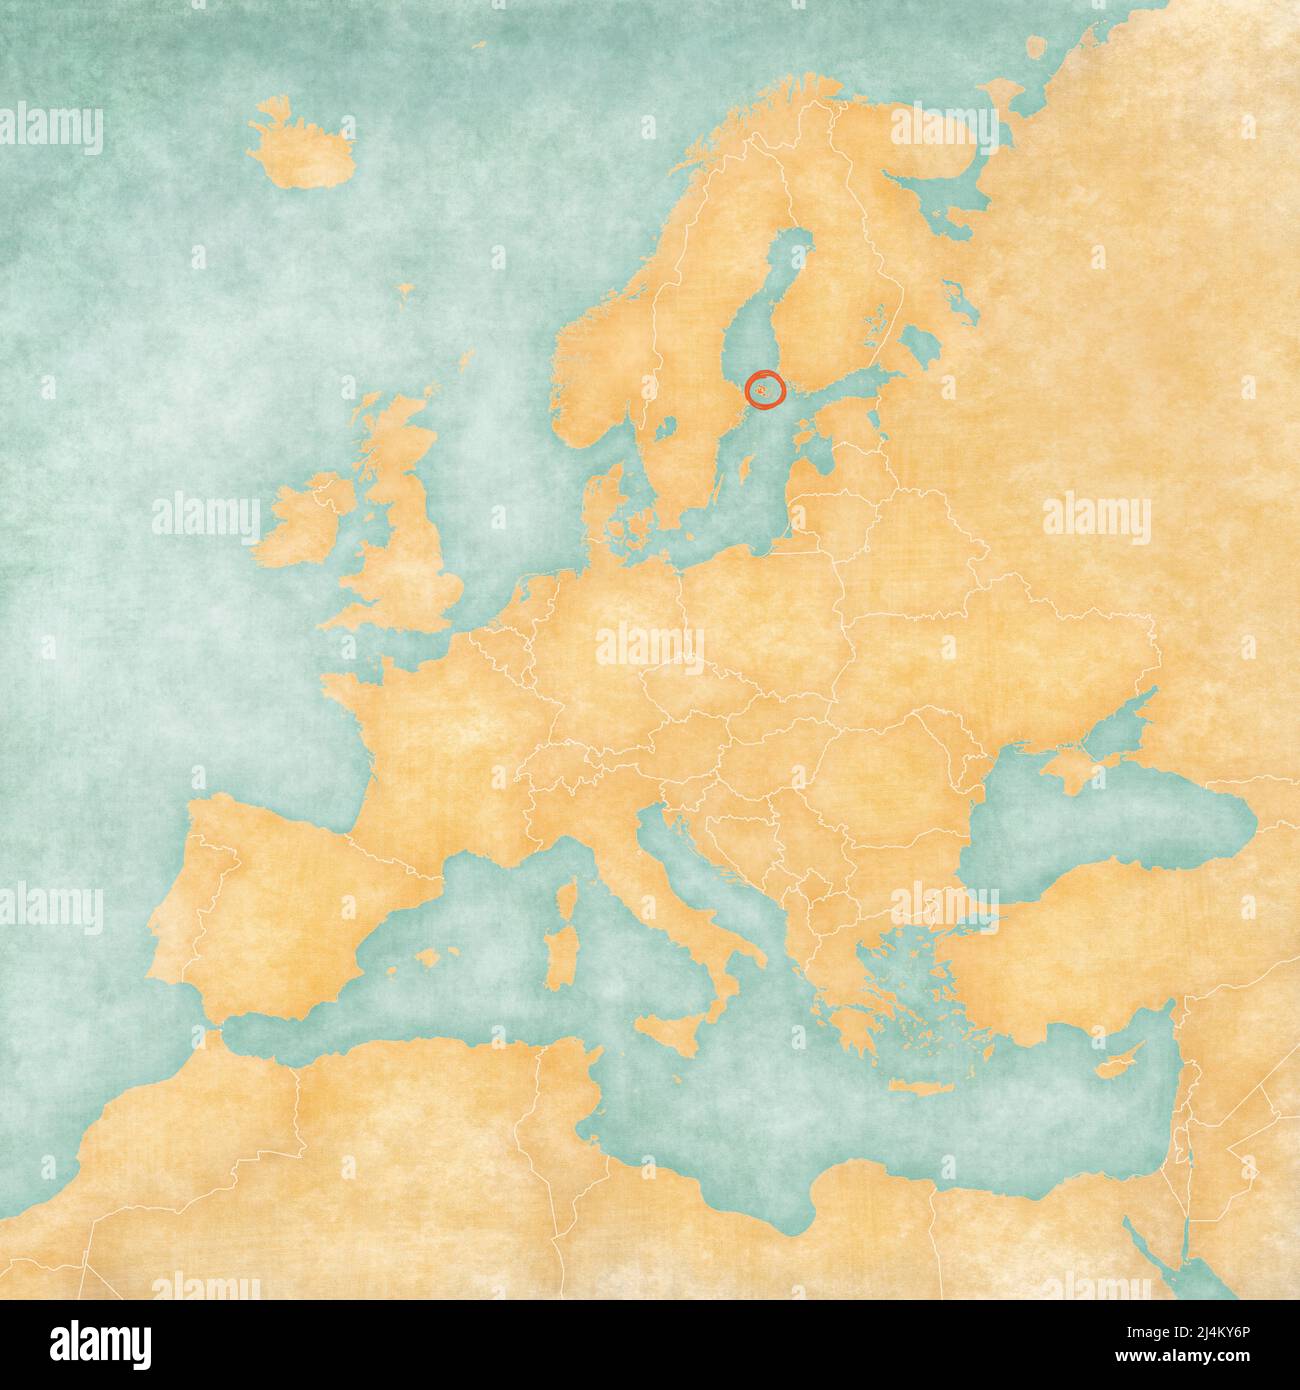 Aland Islands on the map of Europe in soft grunge and vintage style, like old paper with watercolor painting. Stock Photo